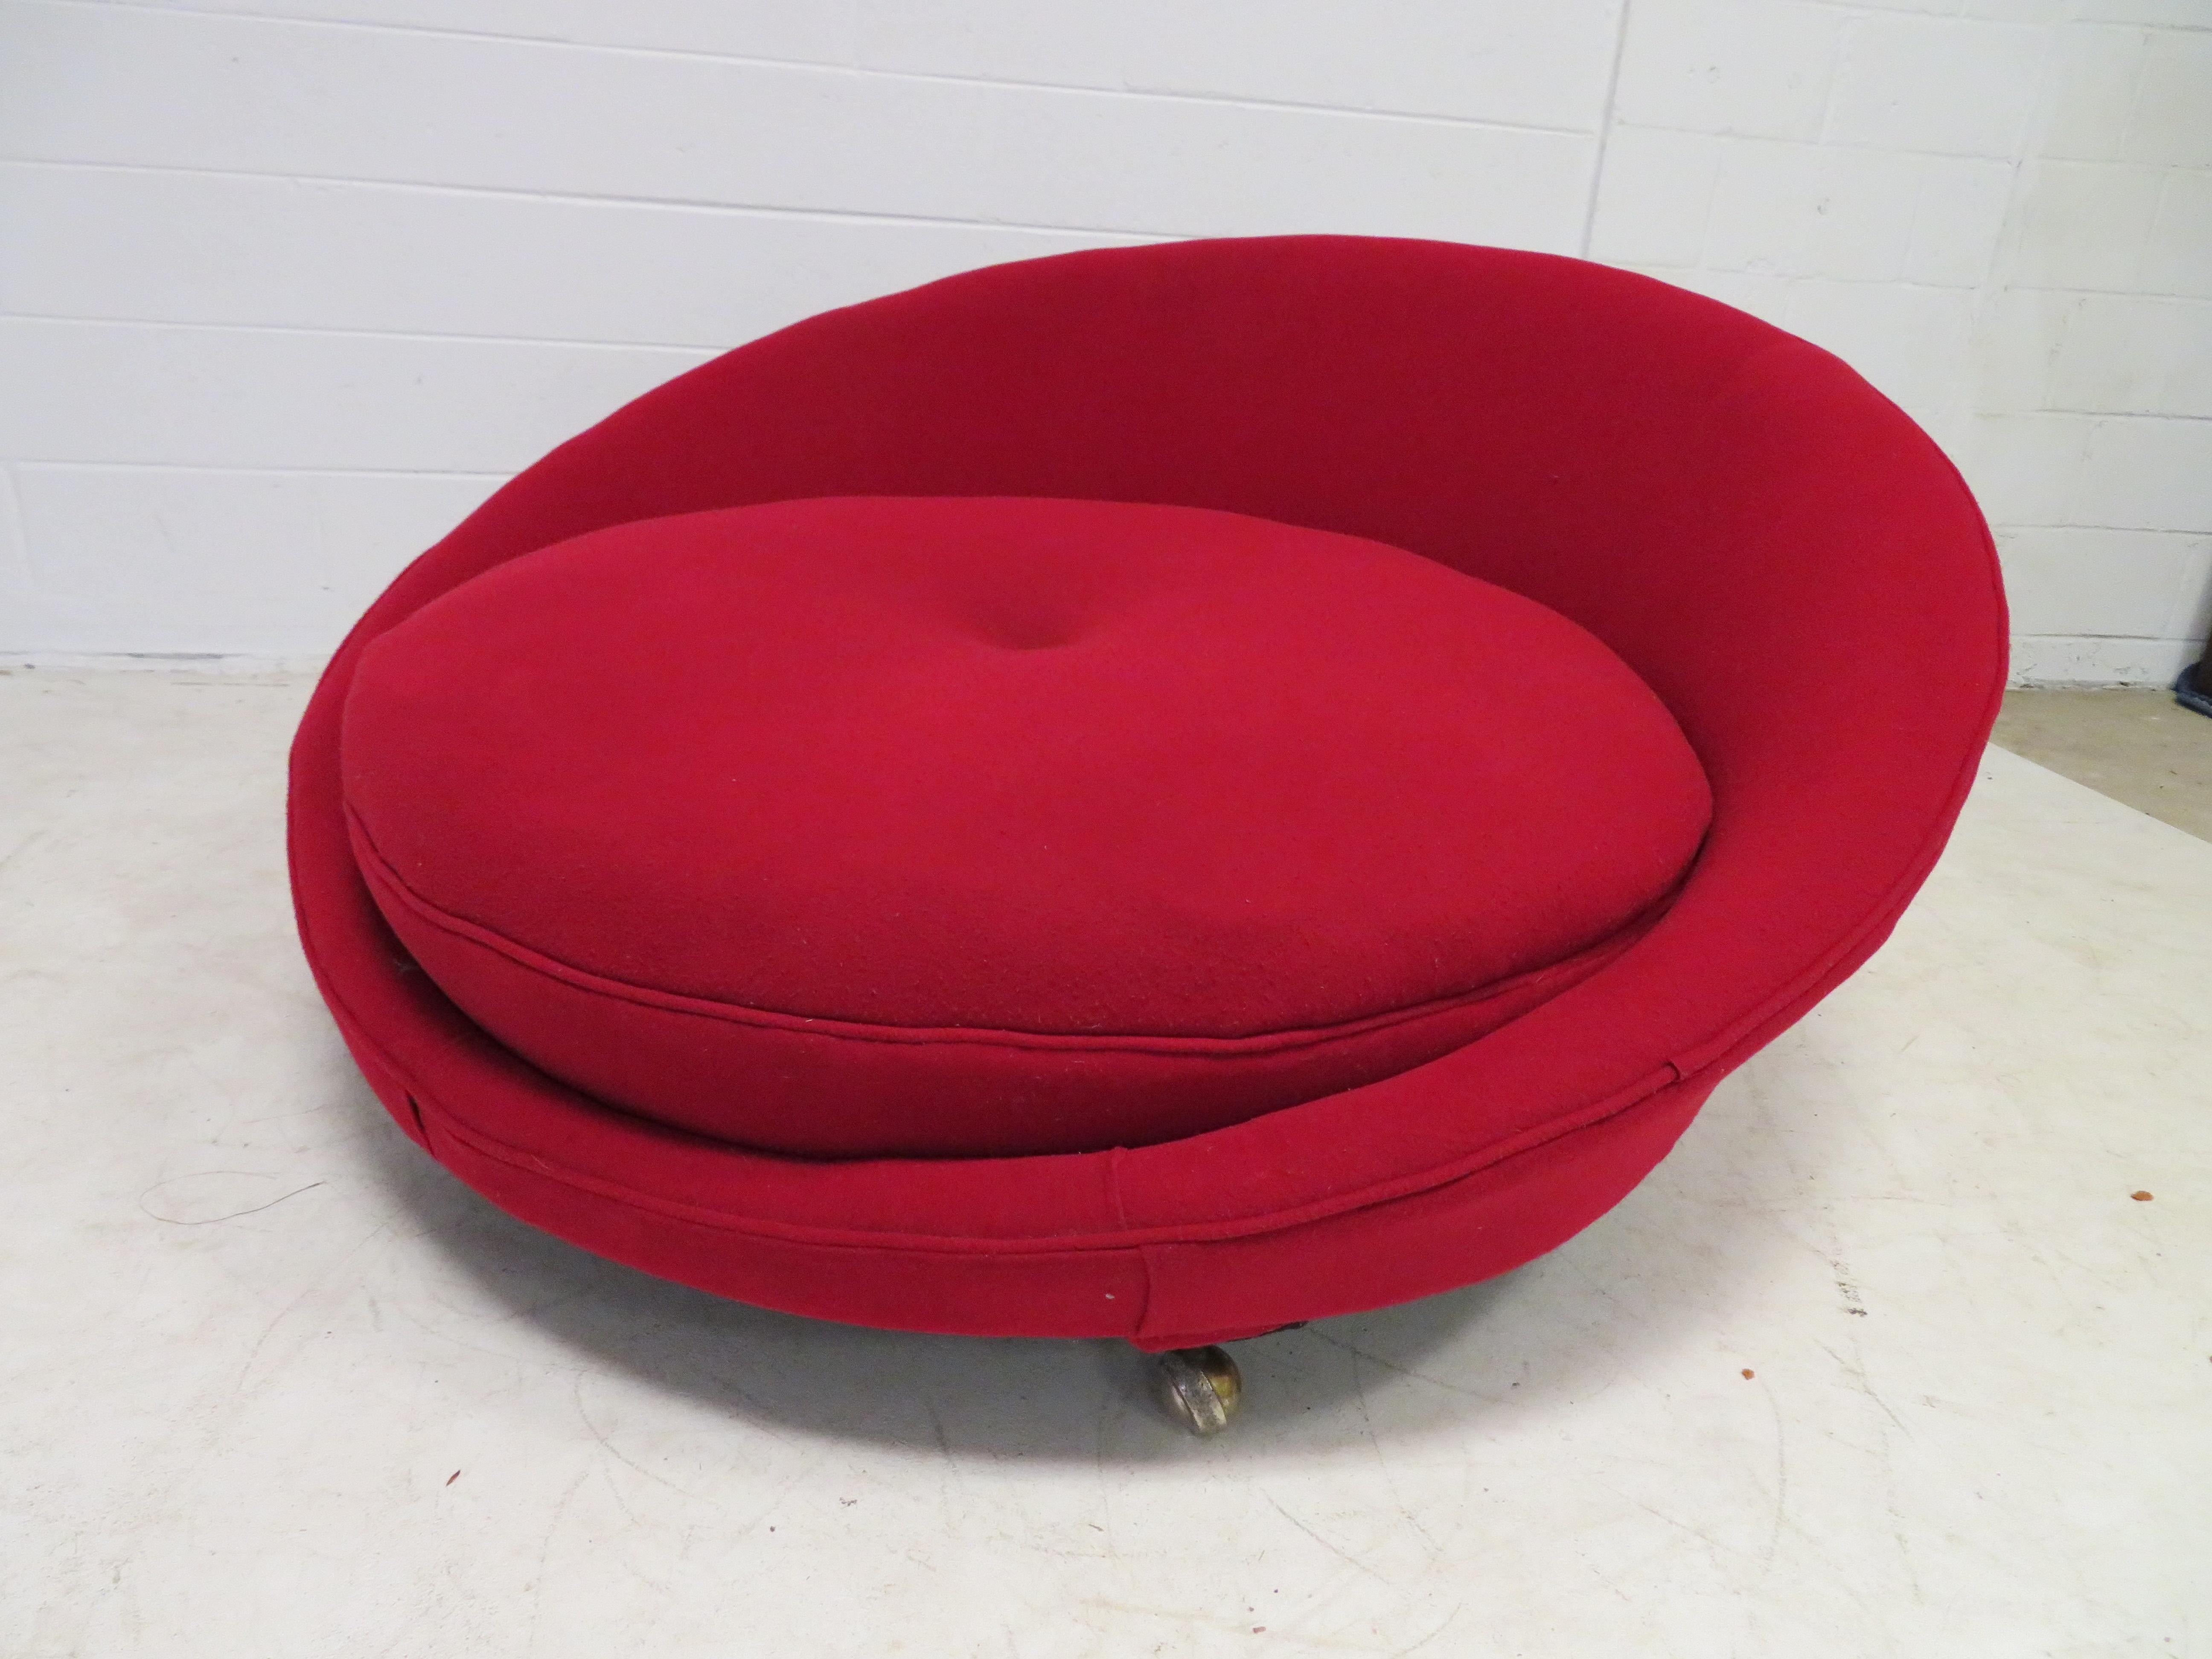 Milo Baughman Style Round Circular Chaise Lounge Chair, Mid-Century Modern For Sale 1